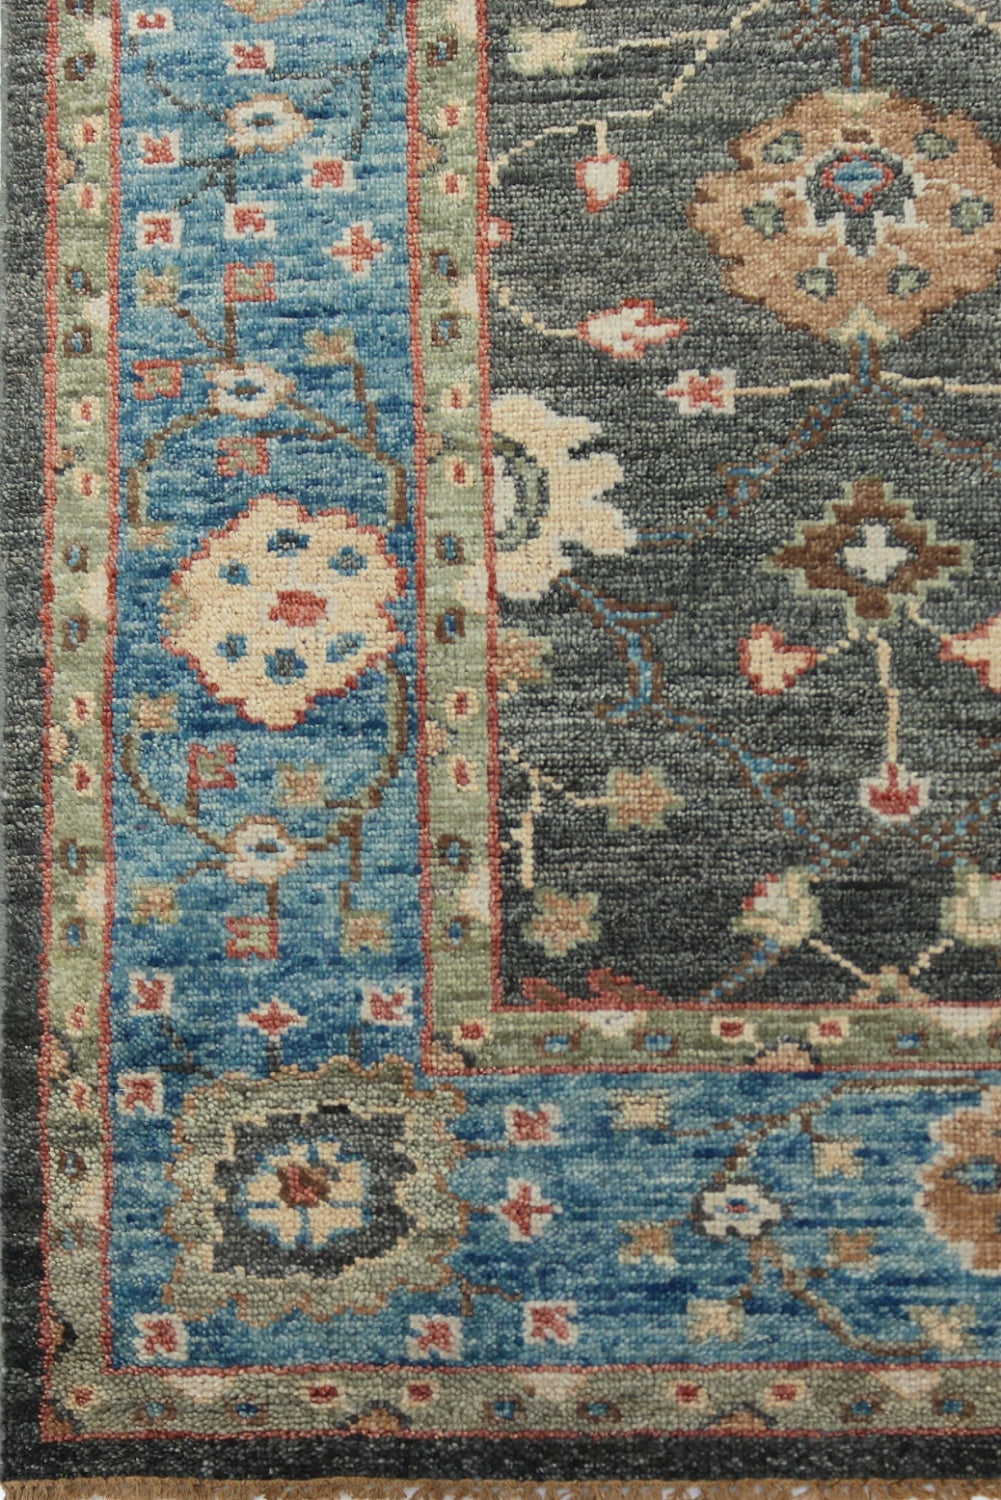 Sultanabad 3 Handwoven Traditional Rug, J71637